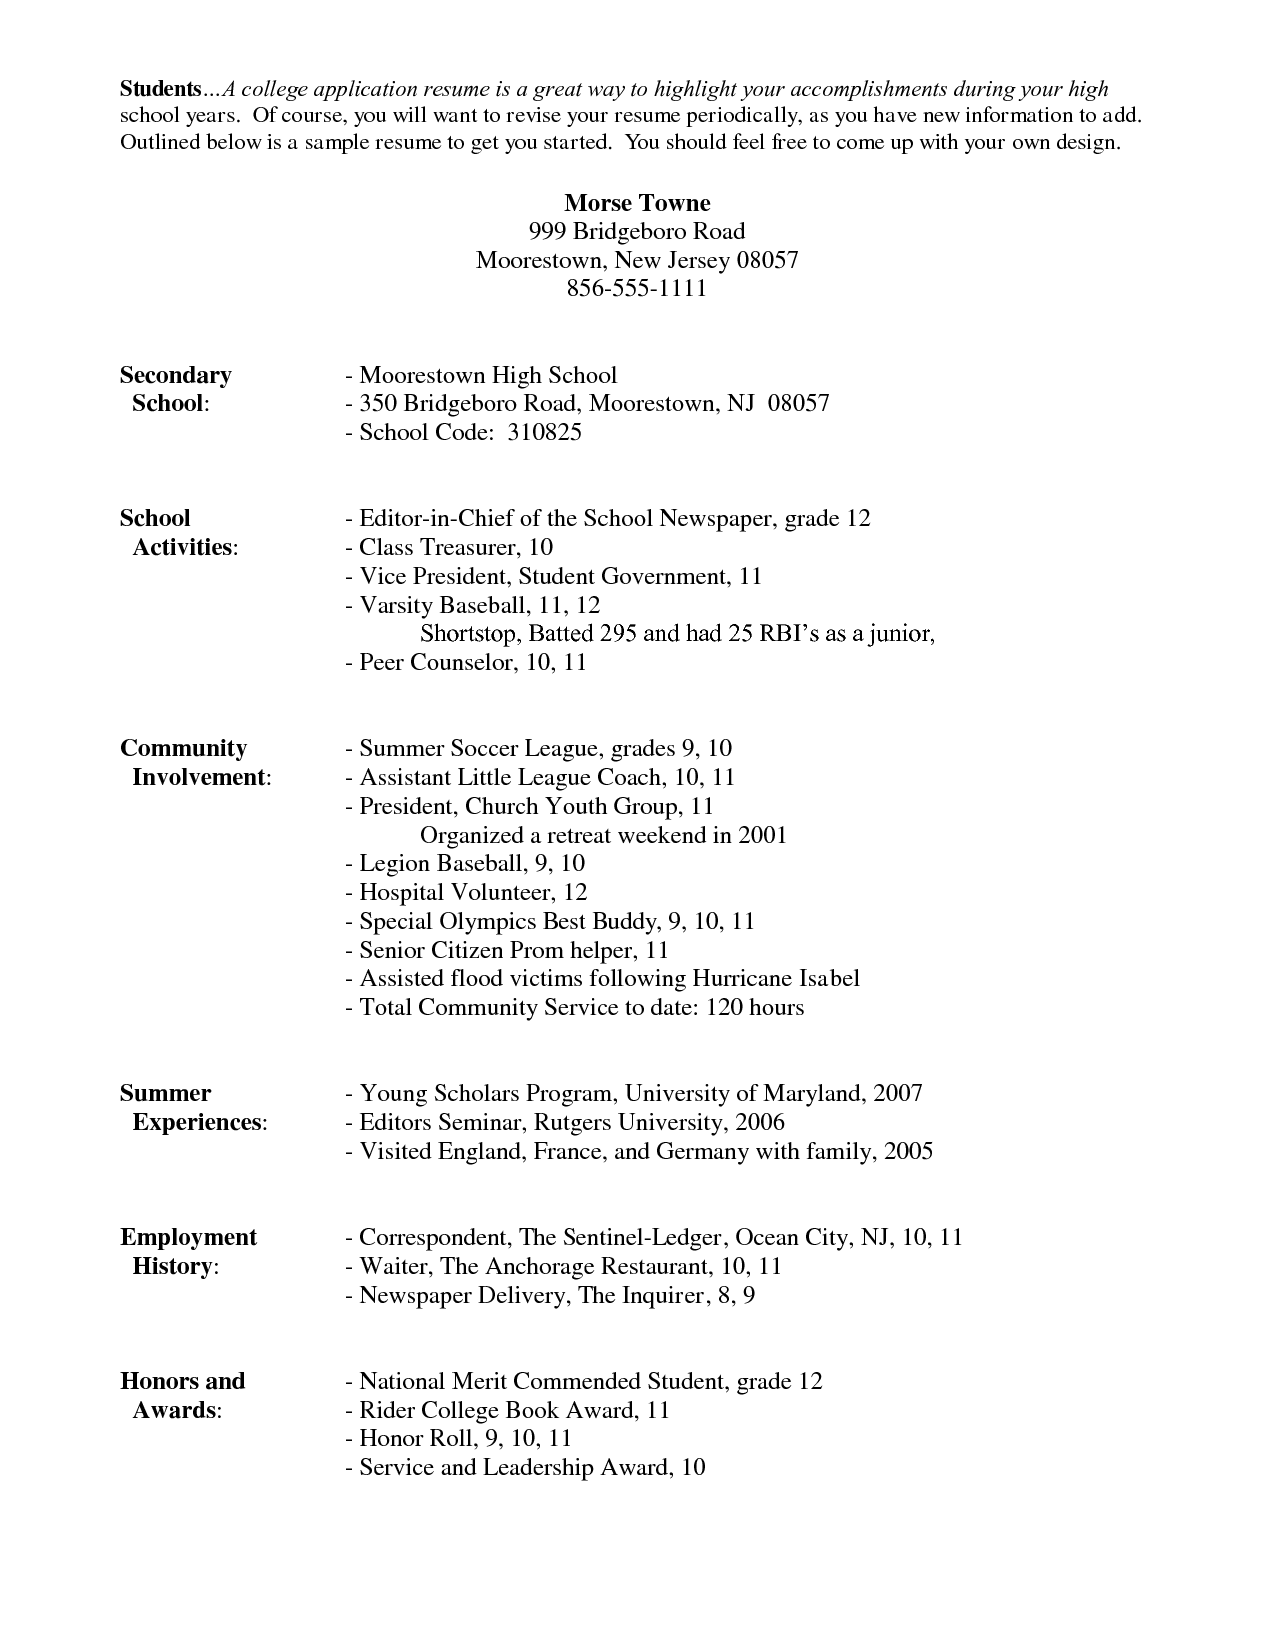 example of resume for college application Kleo.beachfix.co